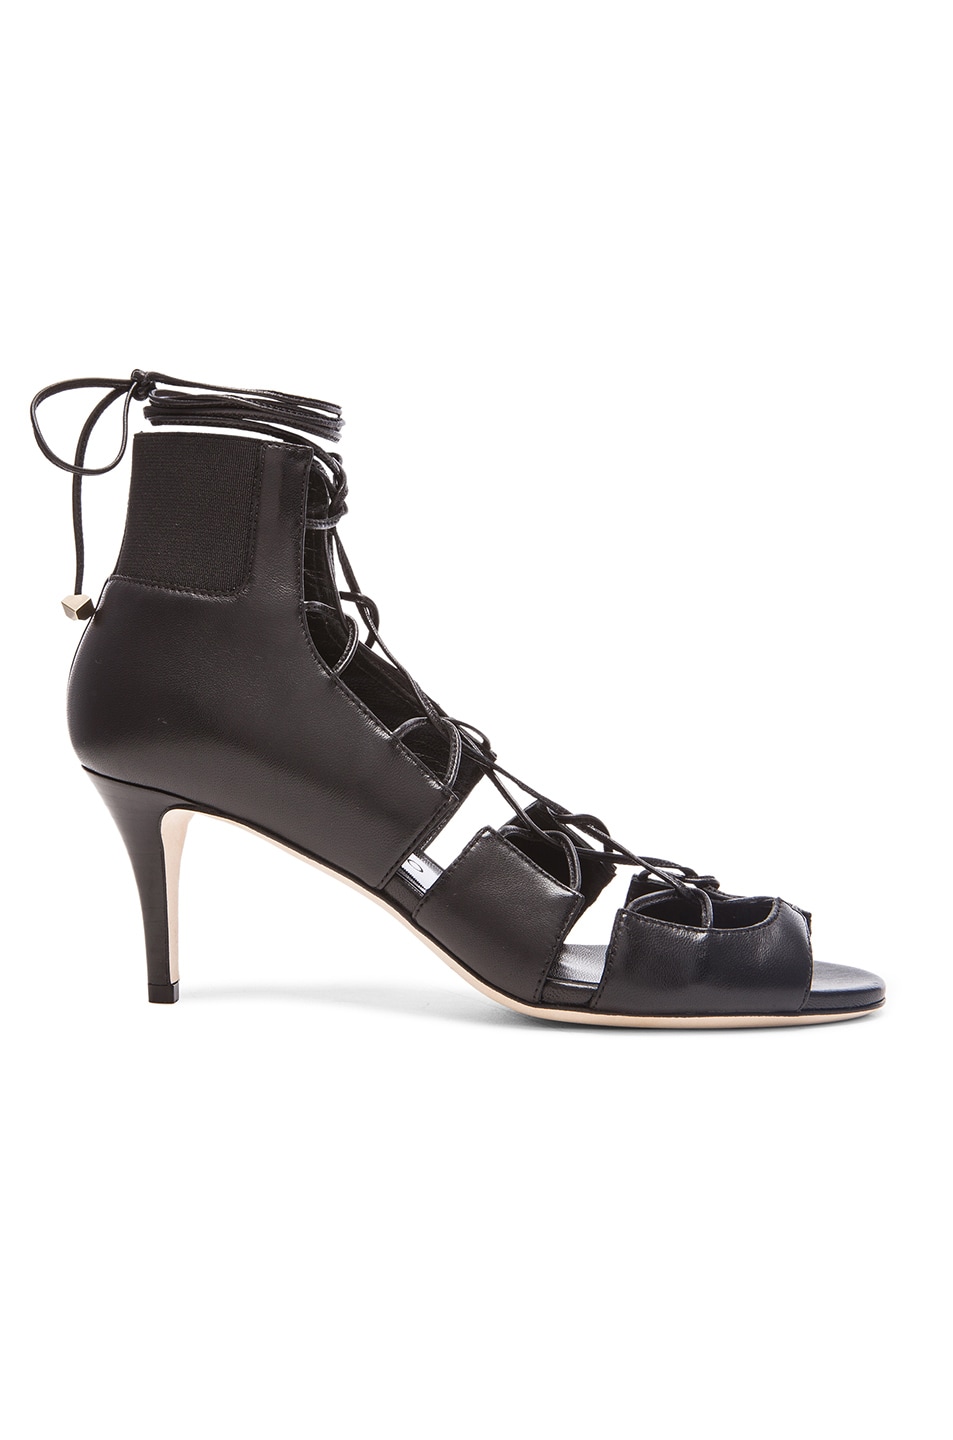 Image 1 of Jimmy Choo Myrtle Leather Lace Up Heels in Black